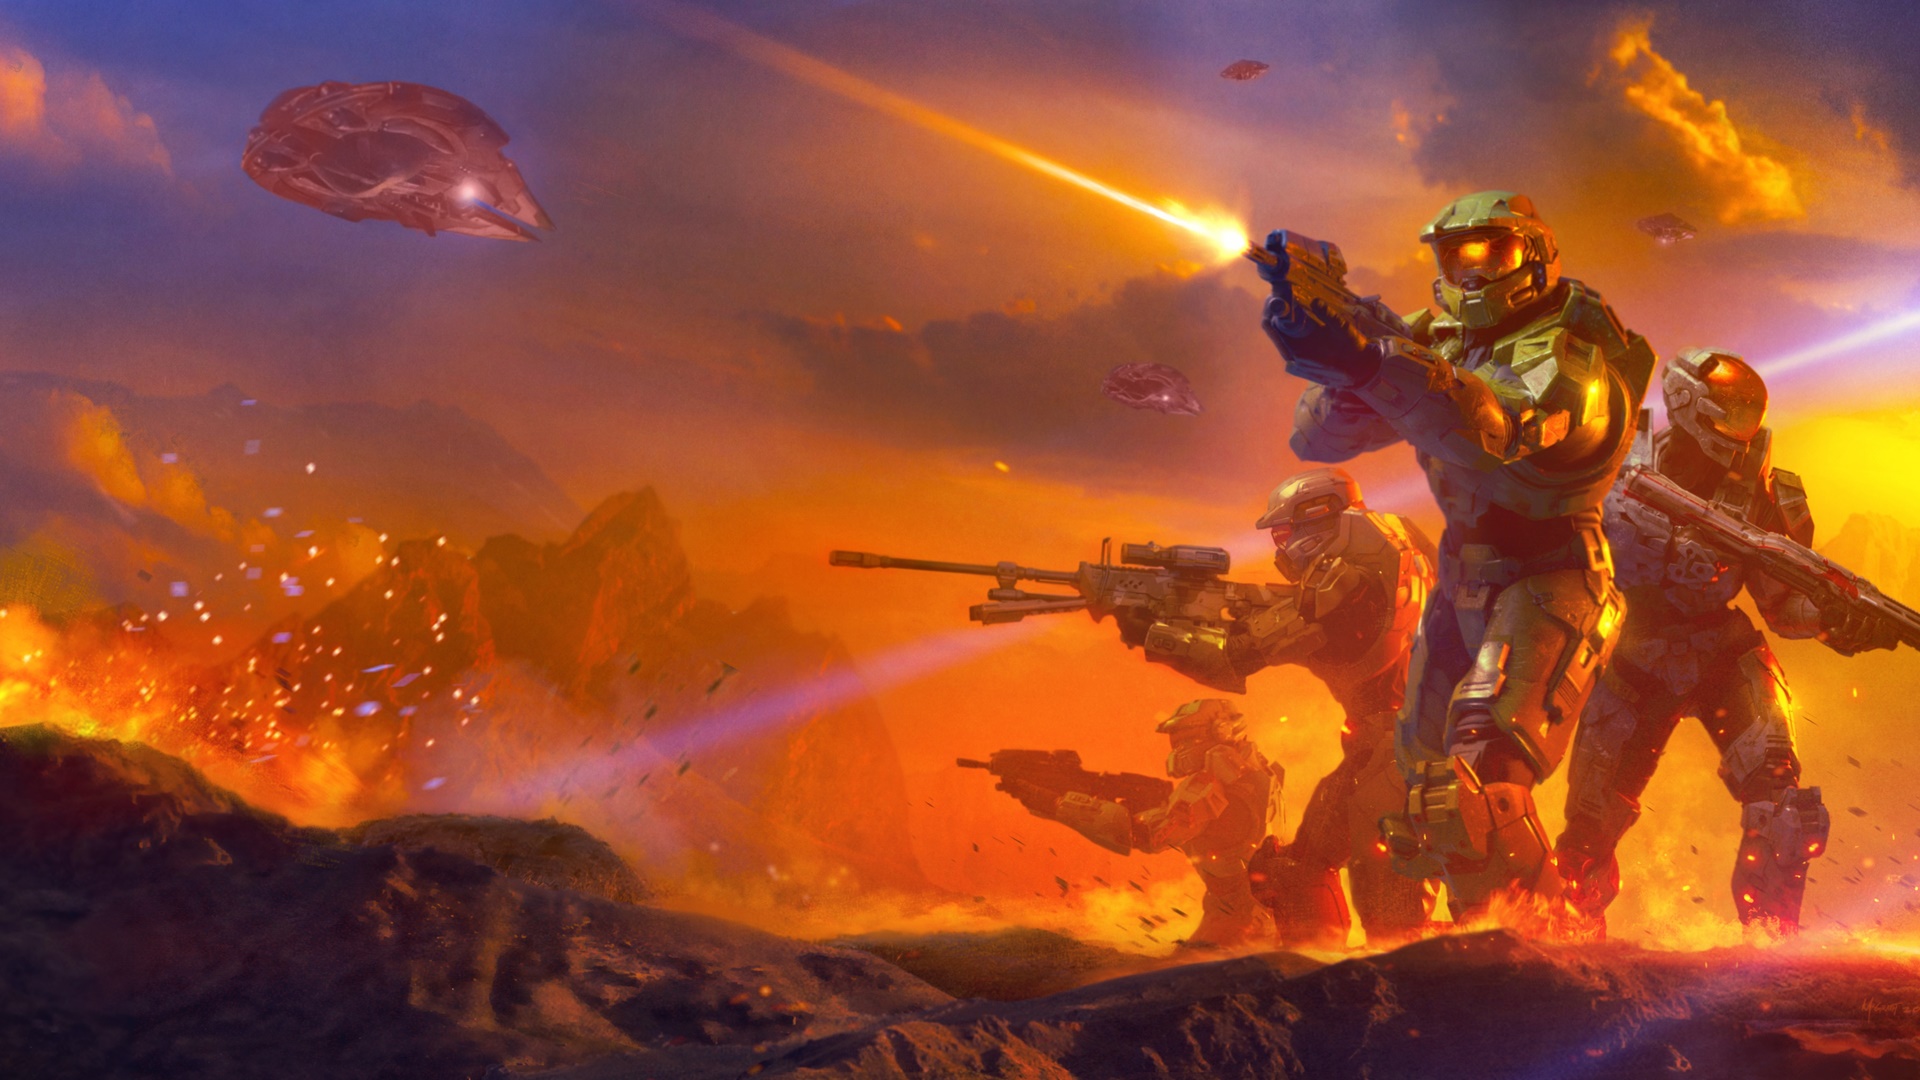 Cover art crop of Halo: Shadows of Reach depicting the Master Chief and Blue Team on the glassed surface of Reach illustrated by Chris McGrath